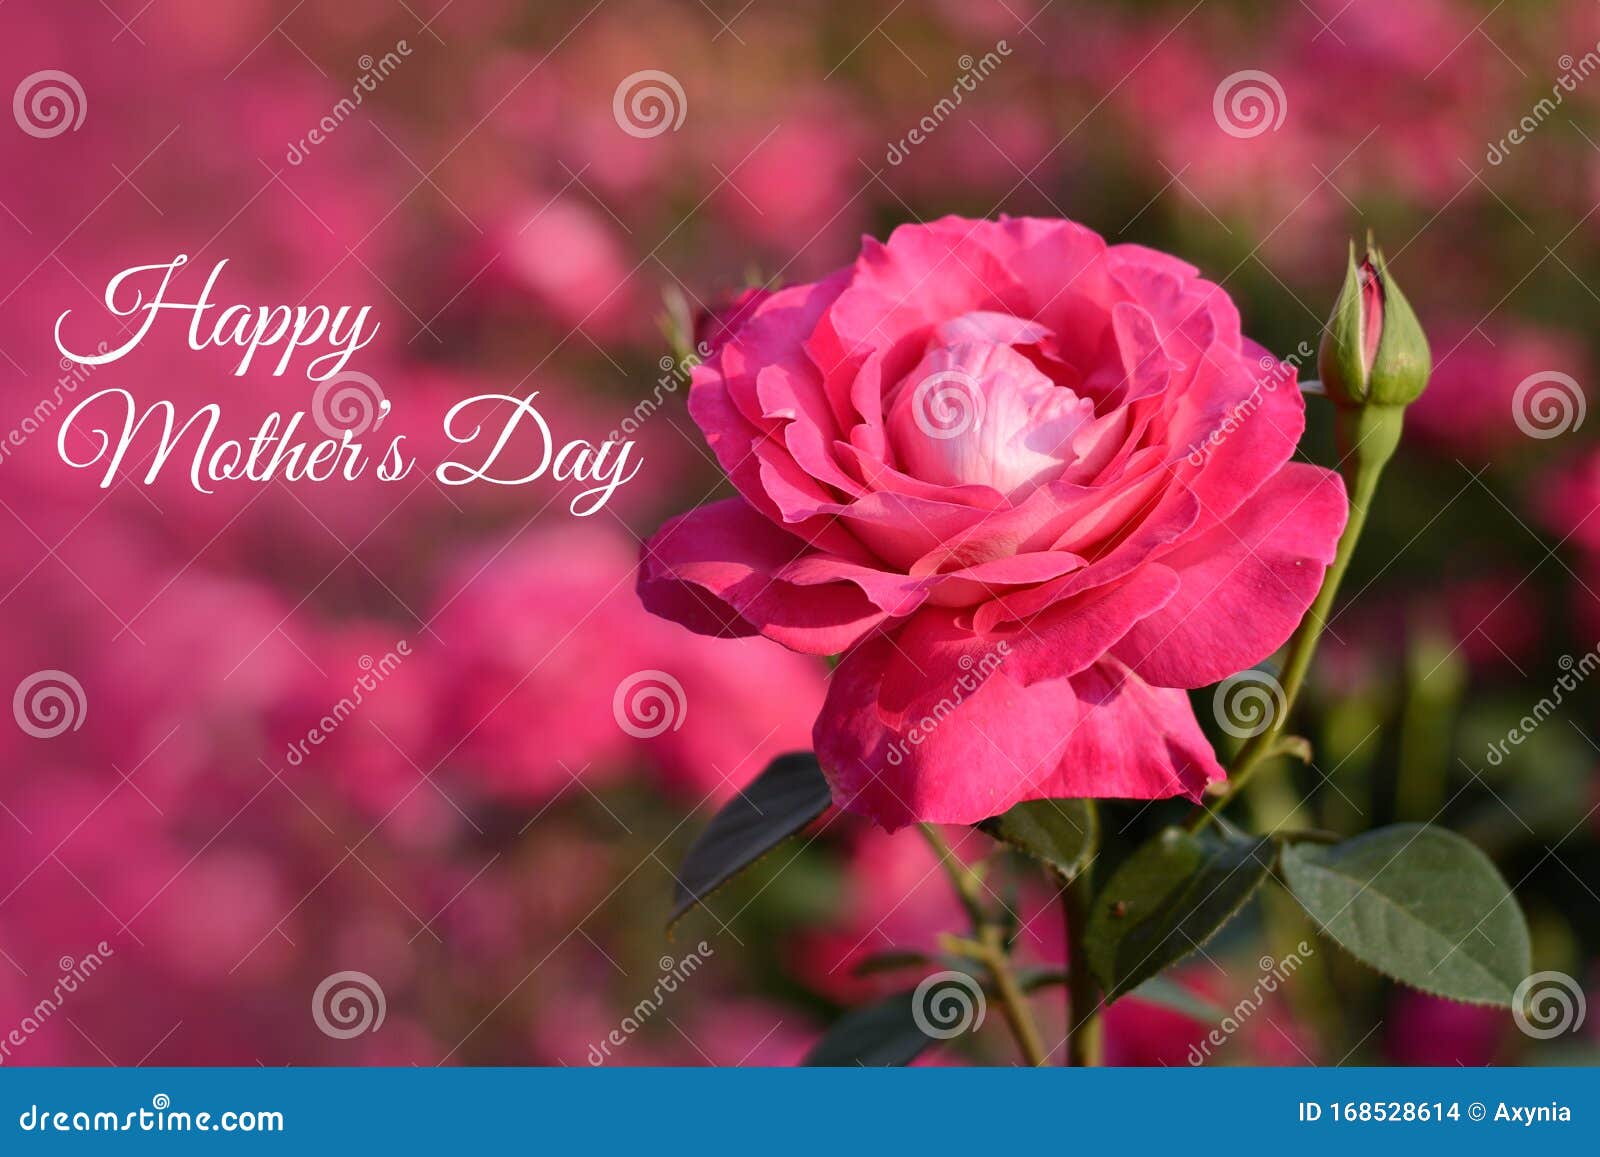 Mothers day card  pink rose